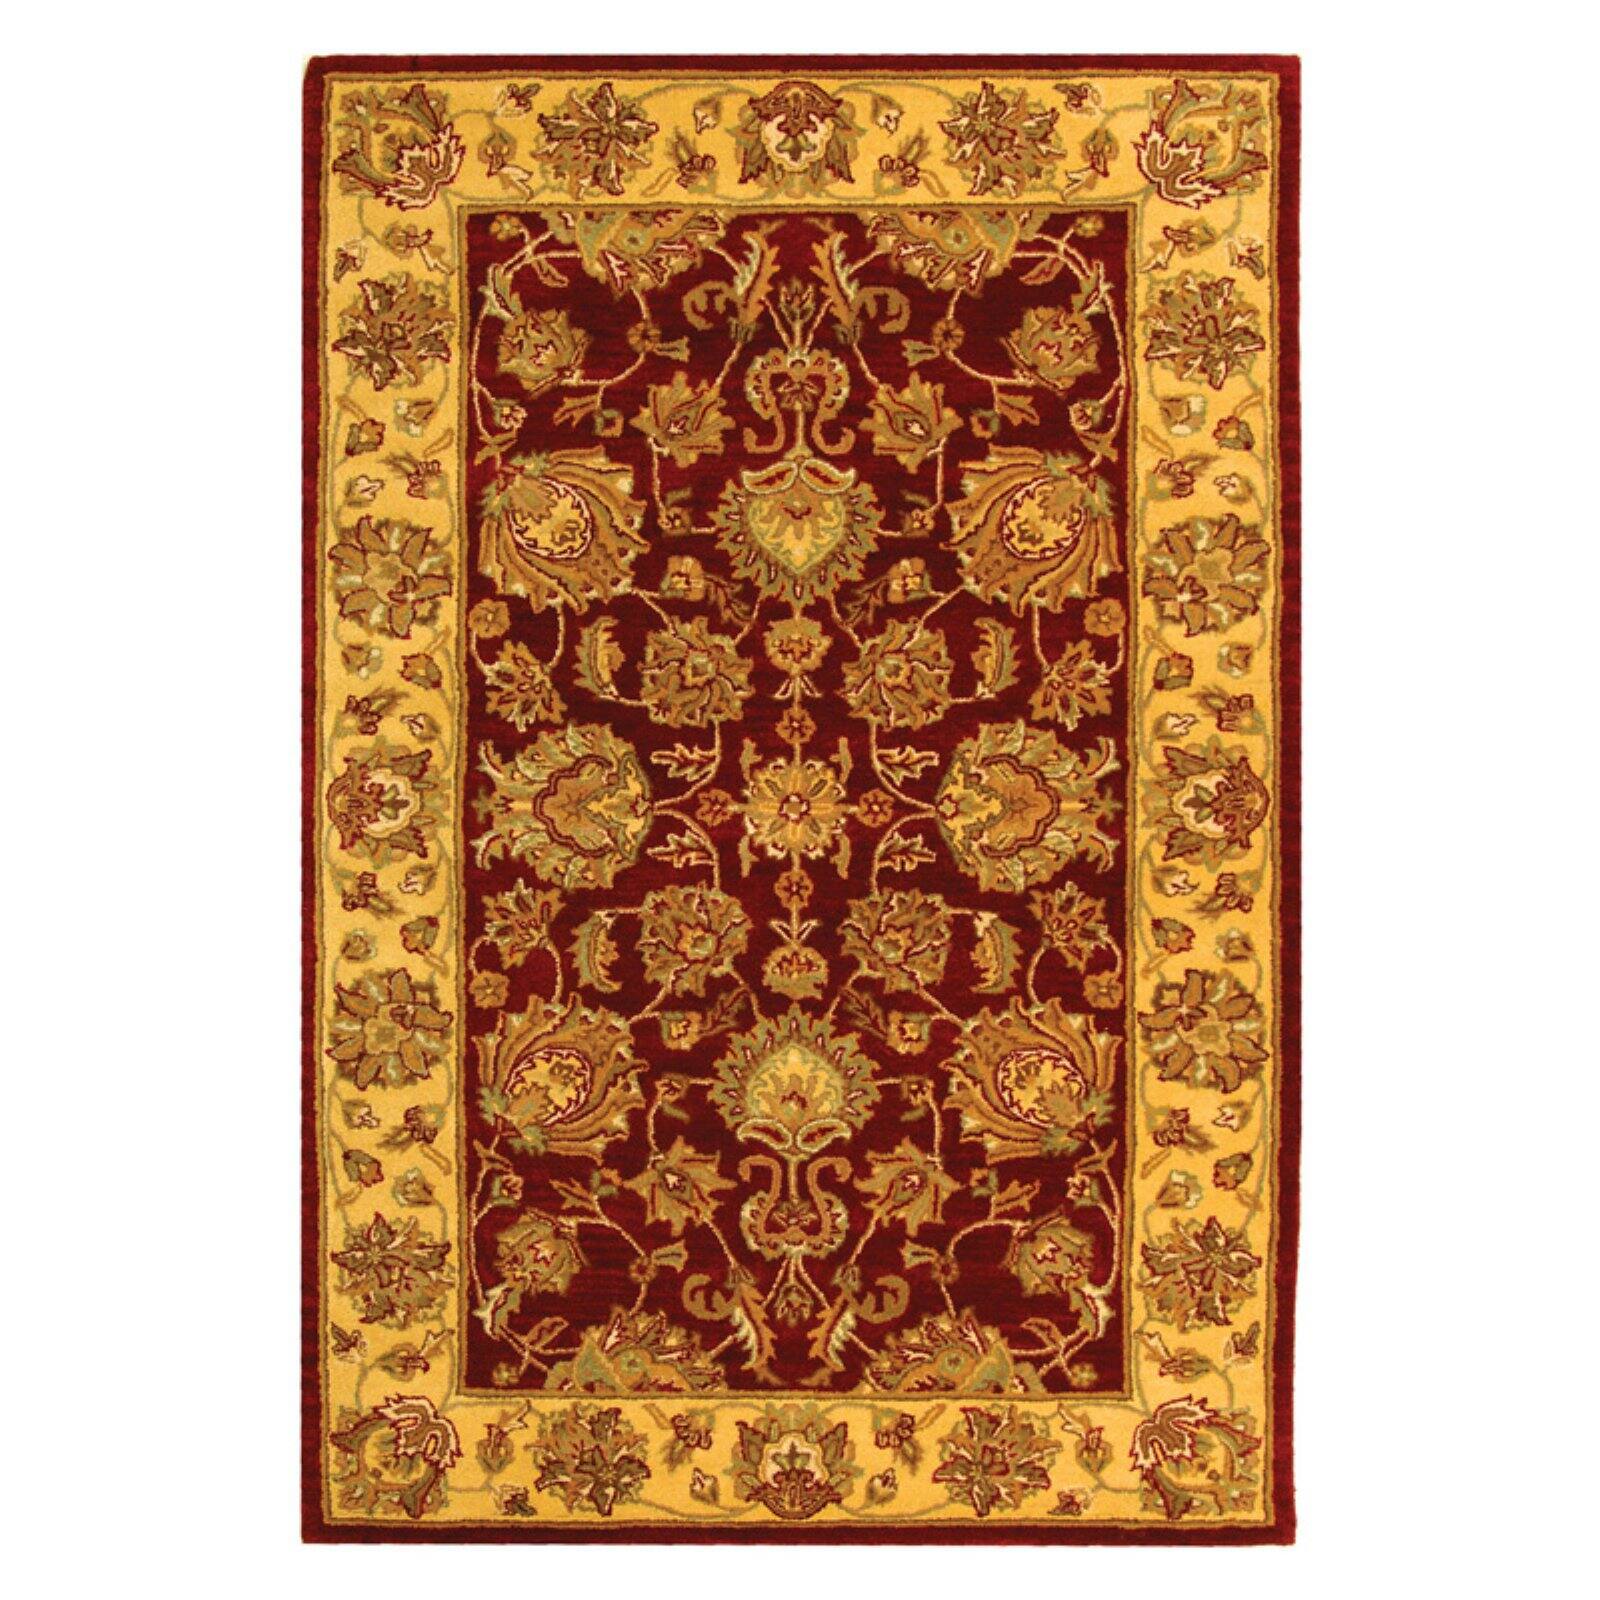 SAFAVIEH Heritage Regis Traditional Wool Area Rug, Red/Gold, 9'6" x 13'6" - image 4 of 9